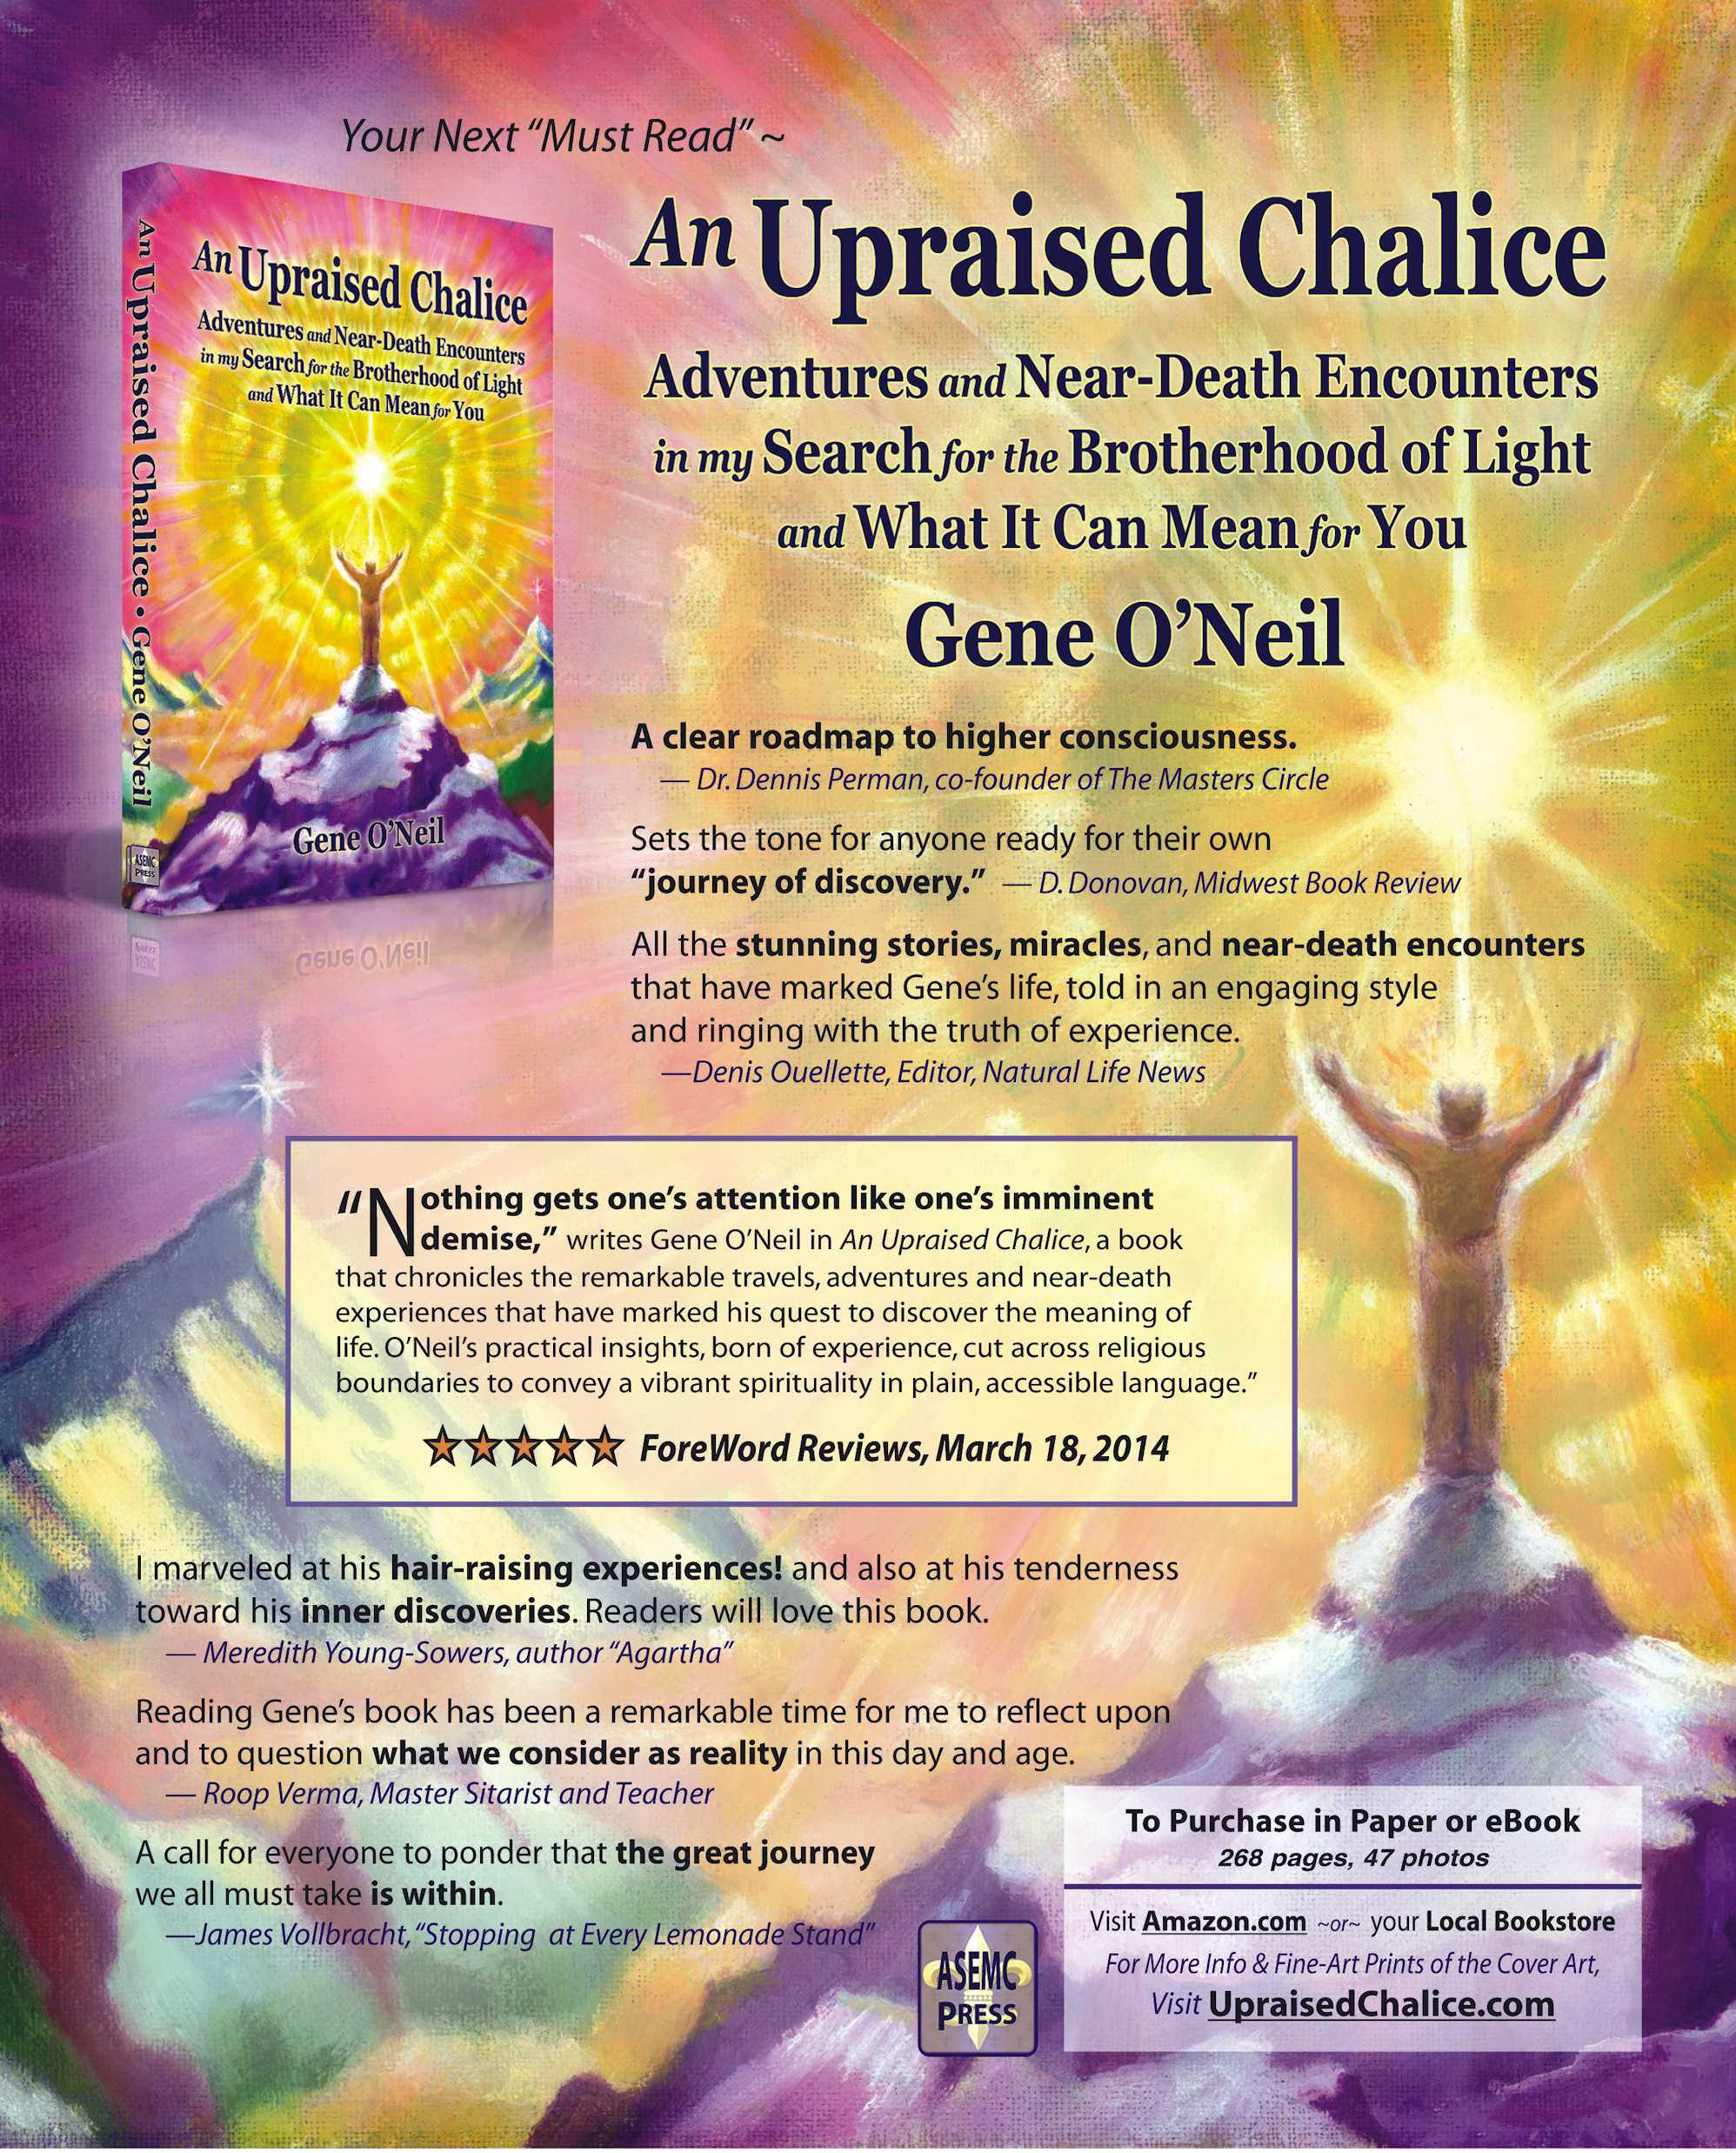 Upraised Chalice publicity